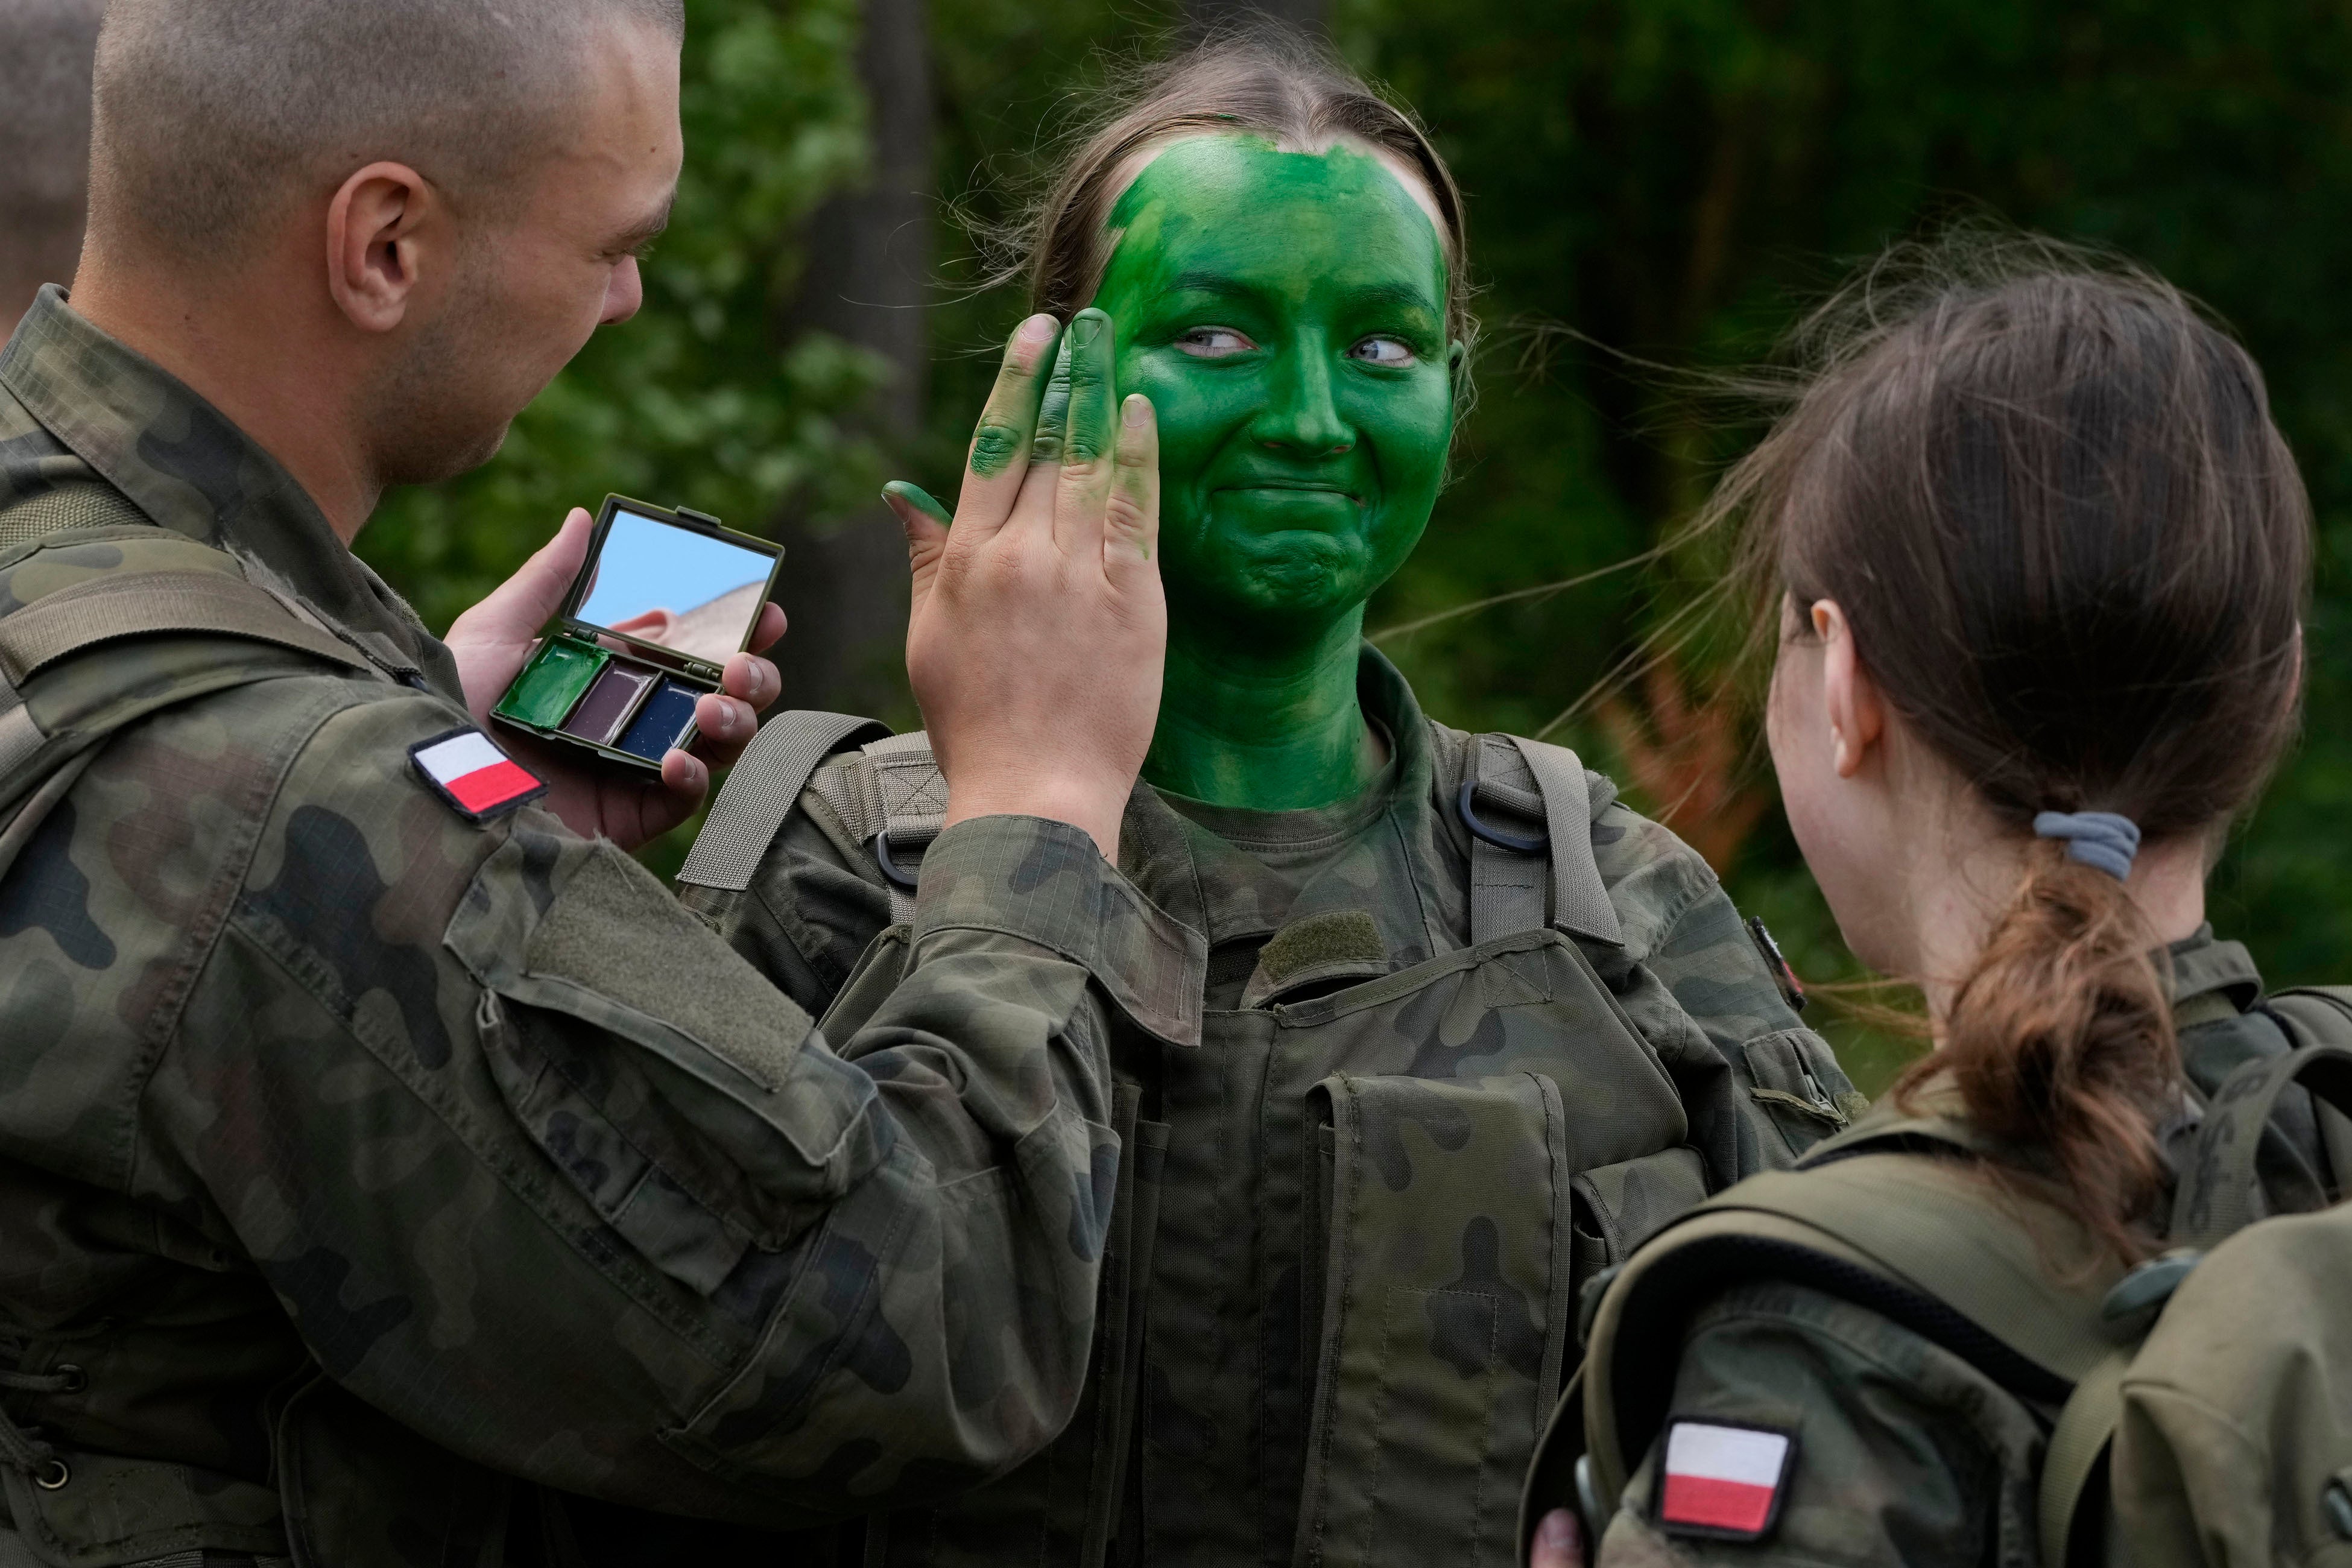 Volunteers in Poland’s army learn to apply camouflage face paint during basic training in Nowogrod, Poland